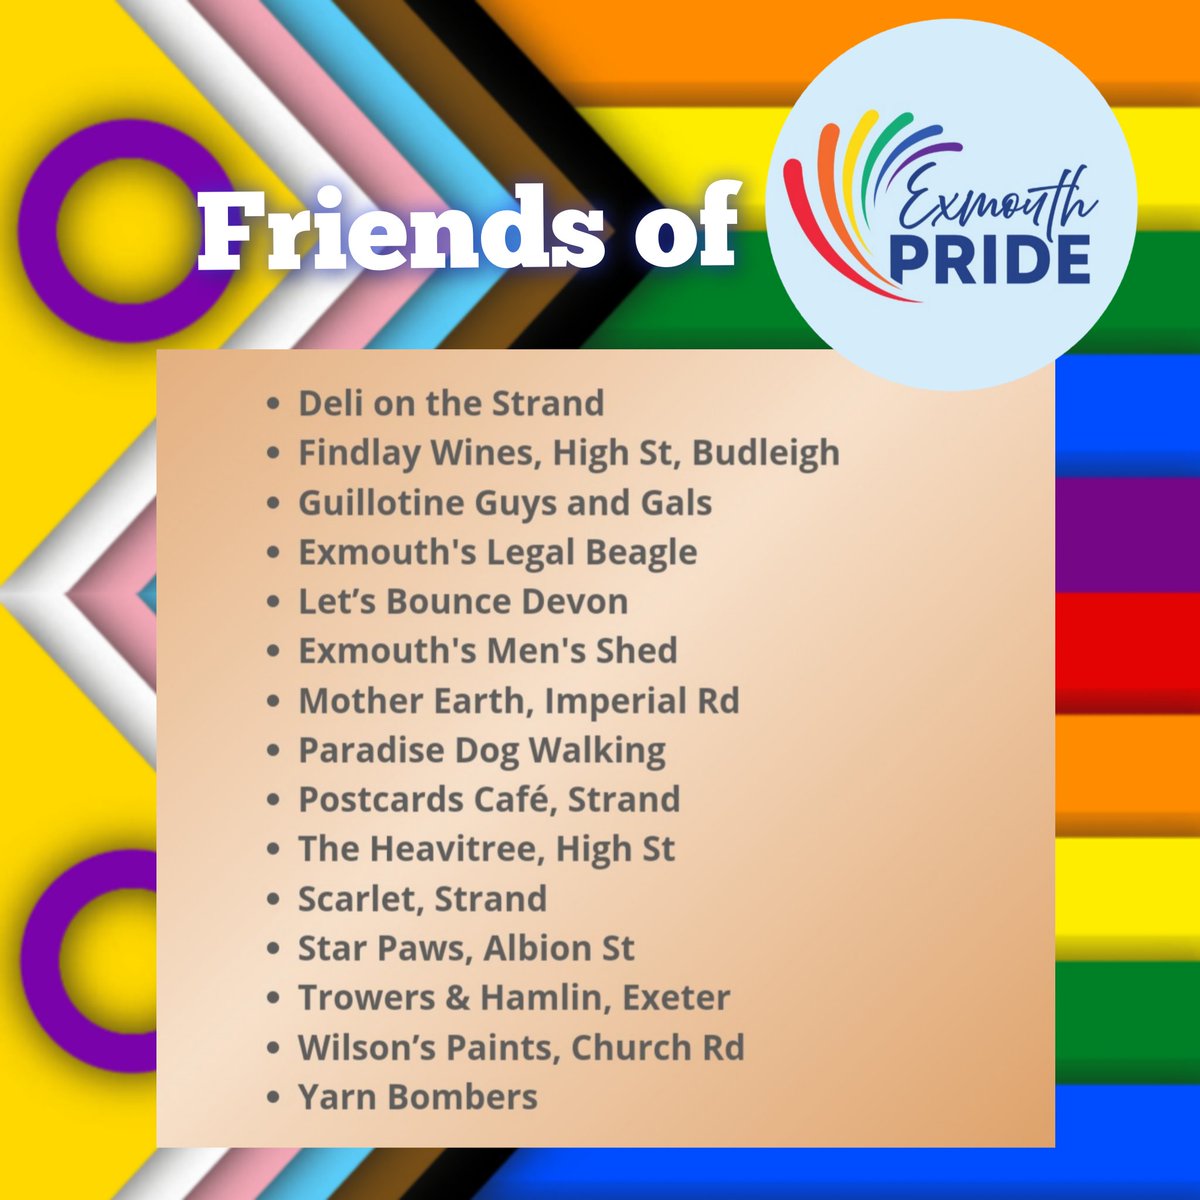 Here's to our amazing friends of #exmouthpride who provide sponsorship and volunteers to help us bring you an exciting and eclectic mix of entertainment each year, in support of our local #locallgbtqcommunity THANK YOU!